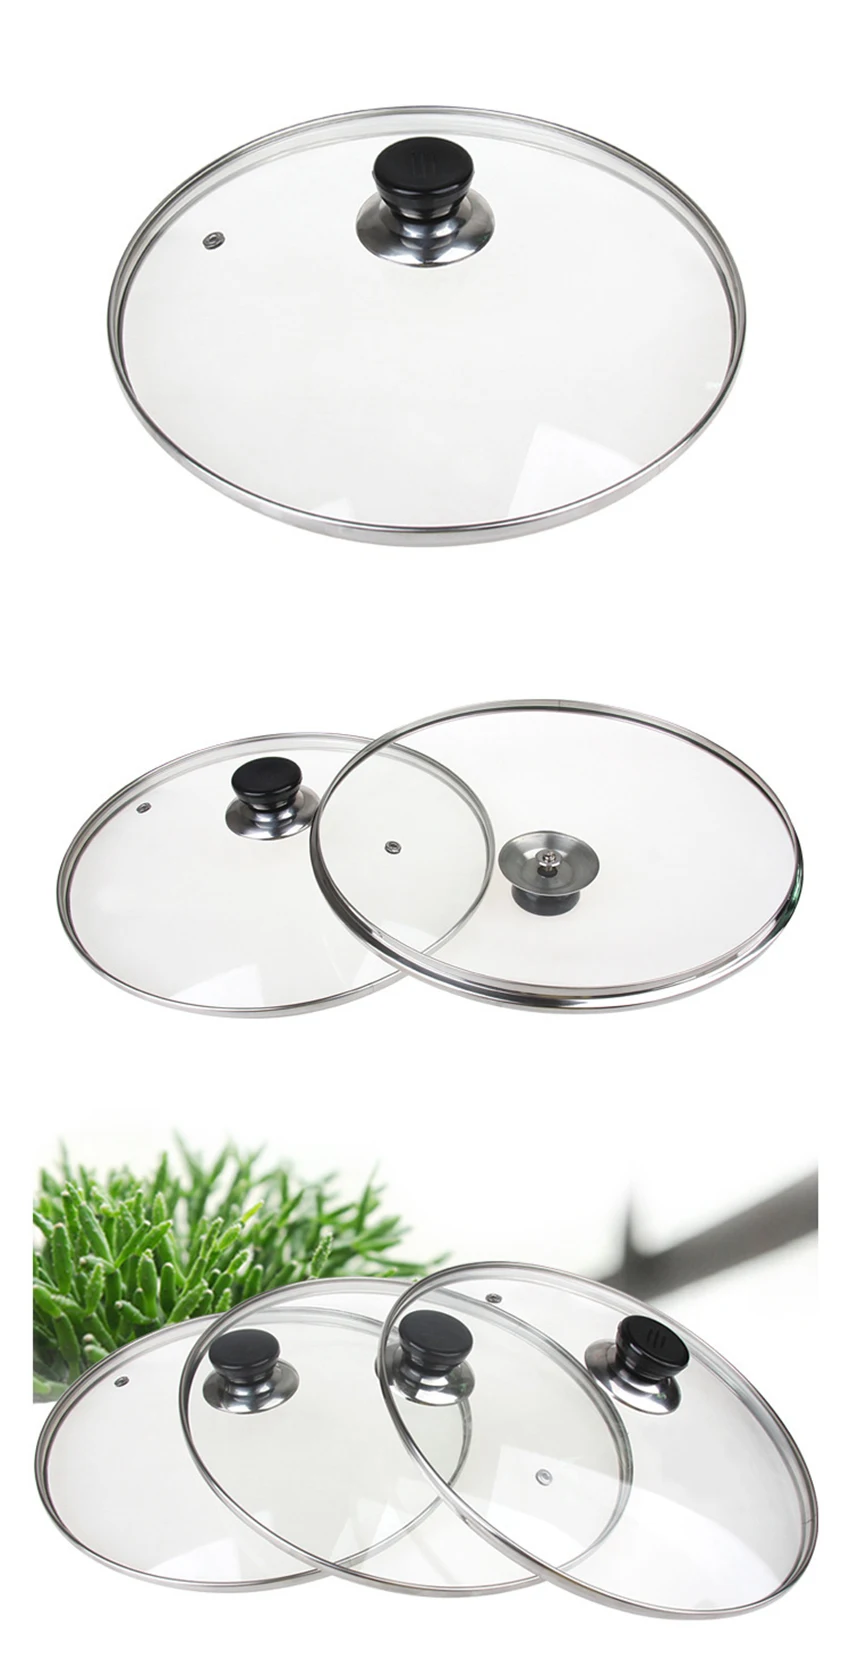 28cm/30cm High Temperature Resistant Transparent Pot Lid Kitchenware Cooking Cookware Accessories Round Glass Cover